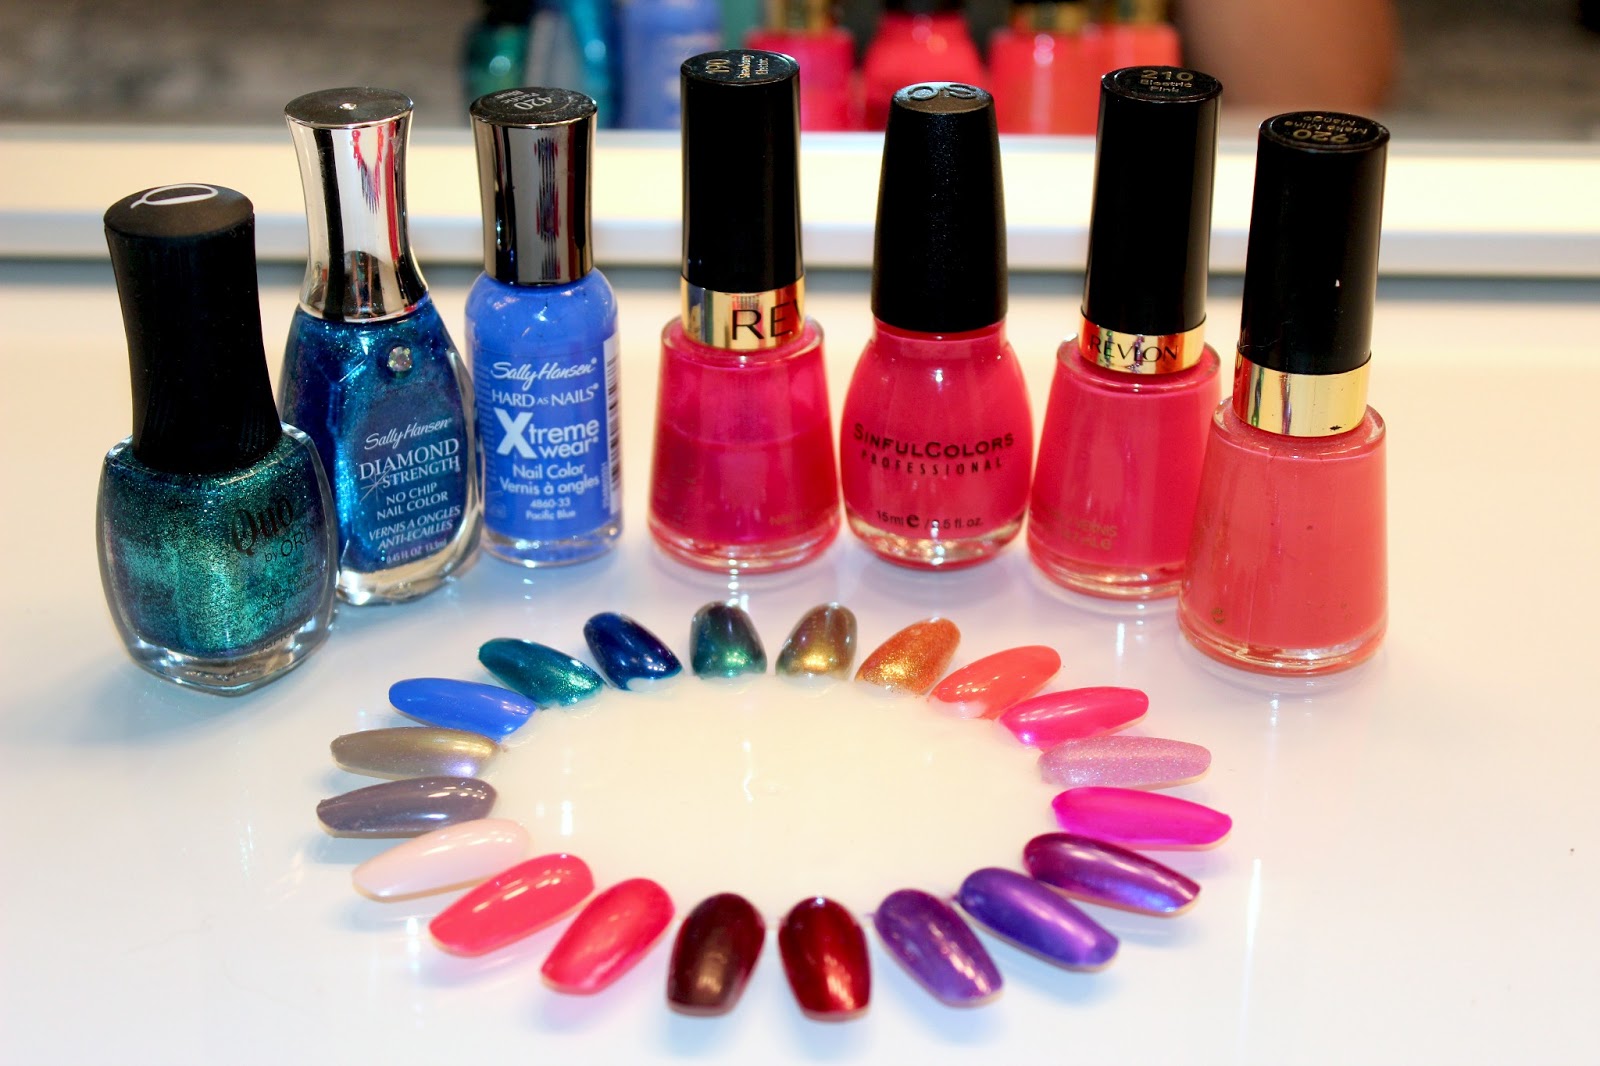 4. "Top Nail Polish Shades for a Summer Manicure" - wide 8